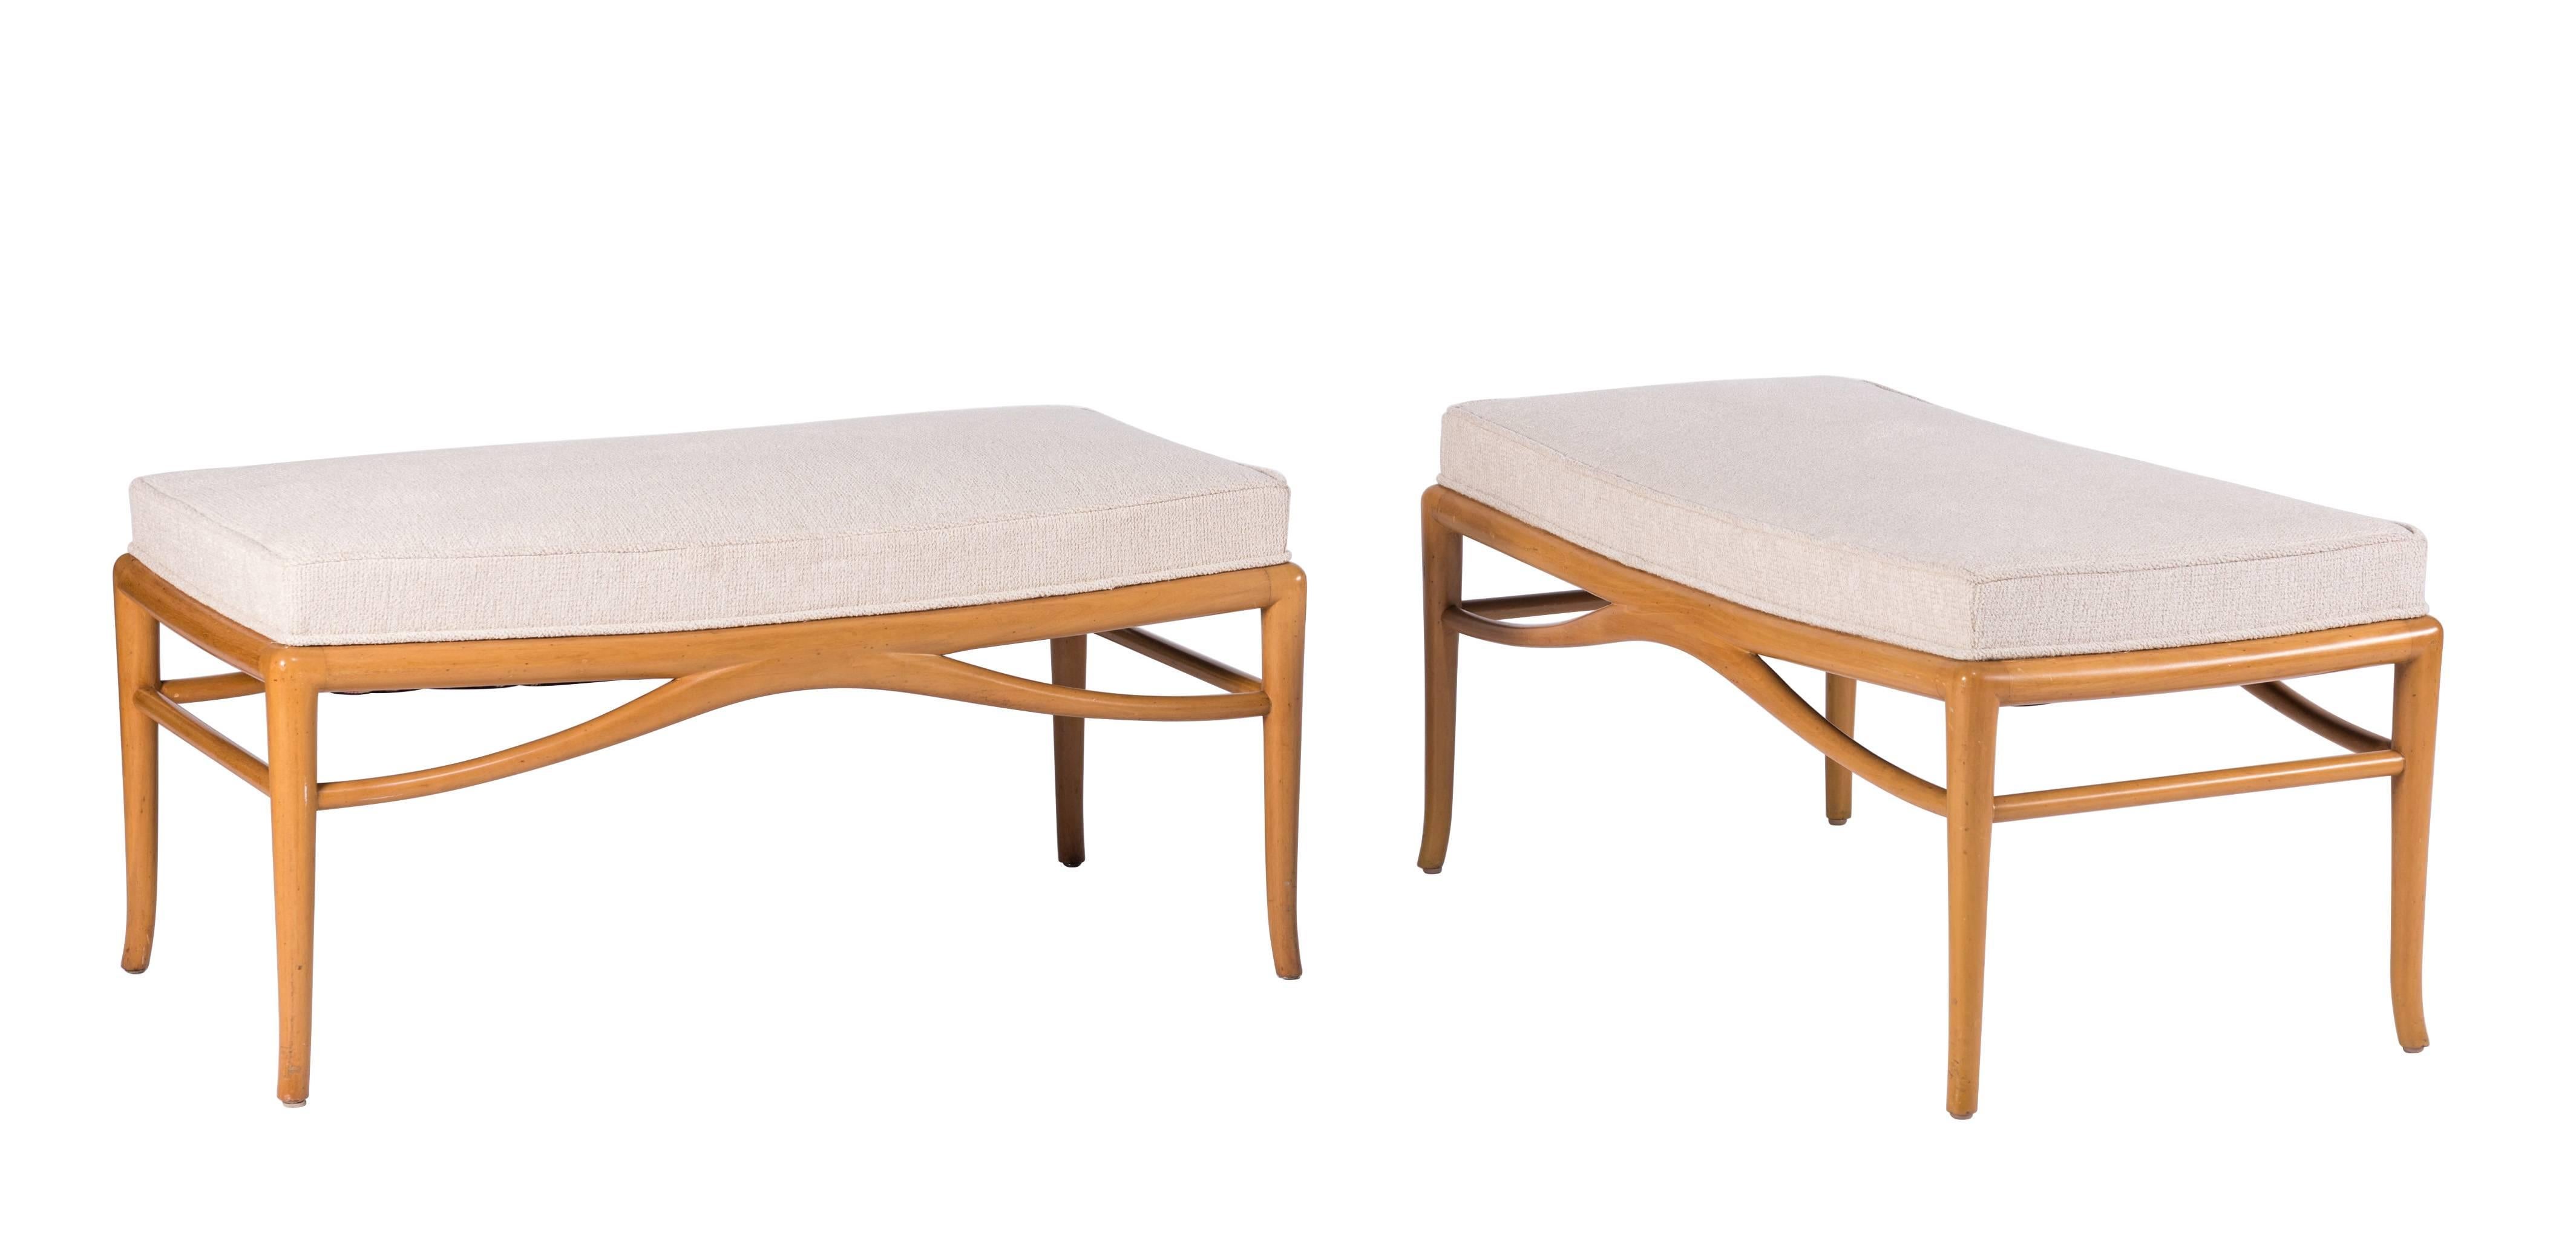 Pair of unique and custom Robsjohn-Gibbings benches for the White Shadow commission, a midcentury residence custom-built in Rancho Mirage, California, for Mr. and Mrs. Thomas B. Davis, circa 1956. This pair of benches are featured in a large spread